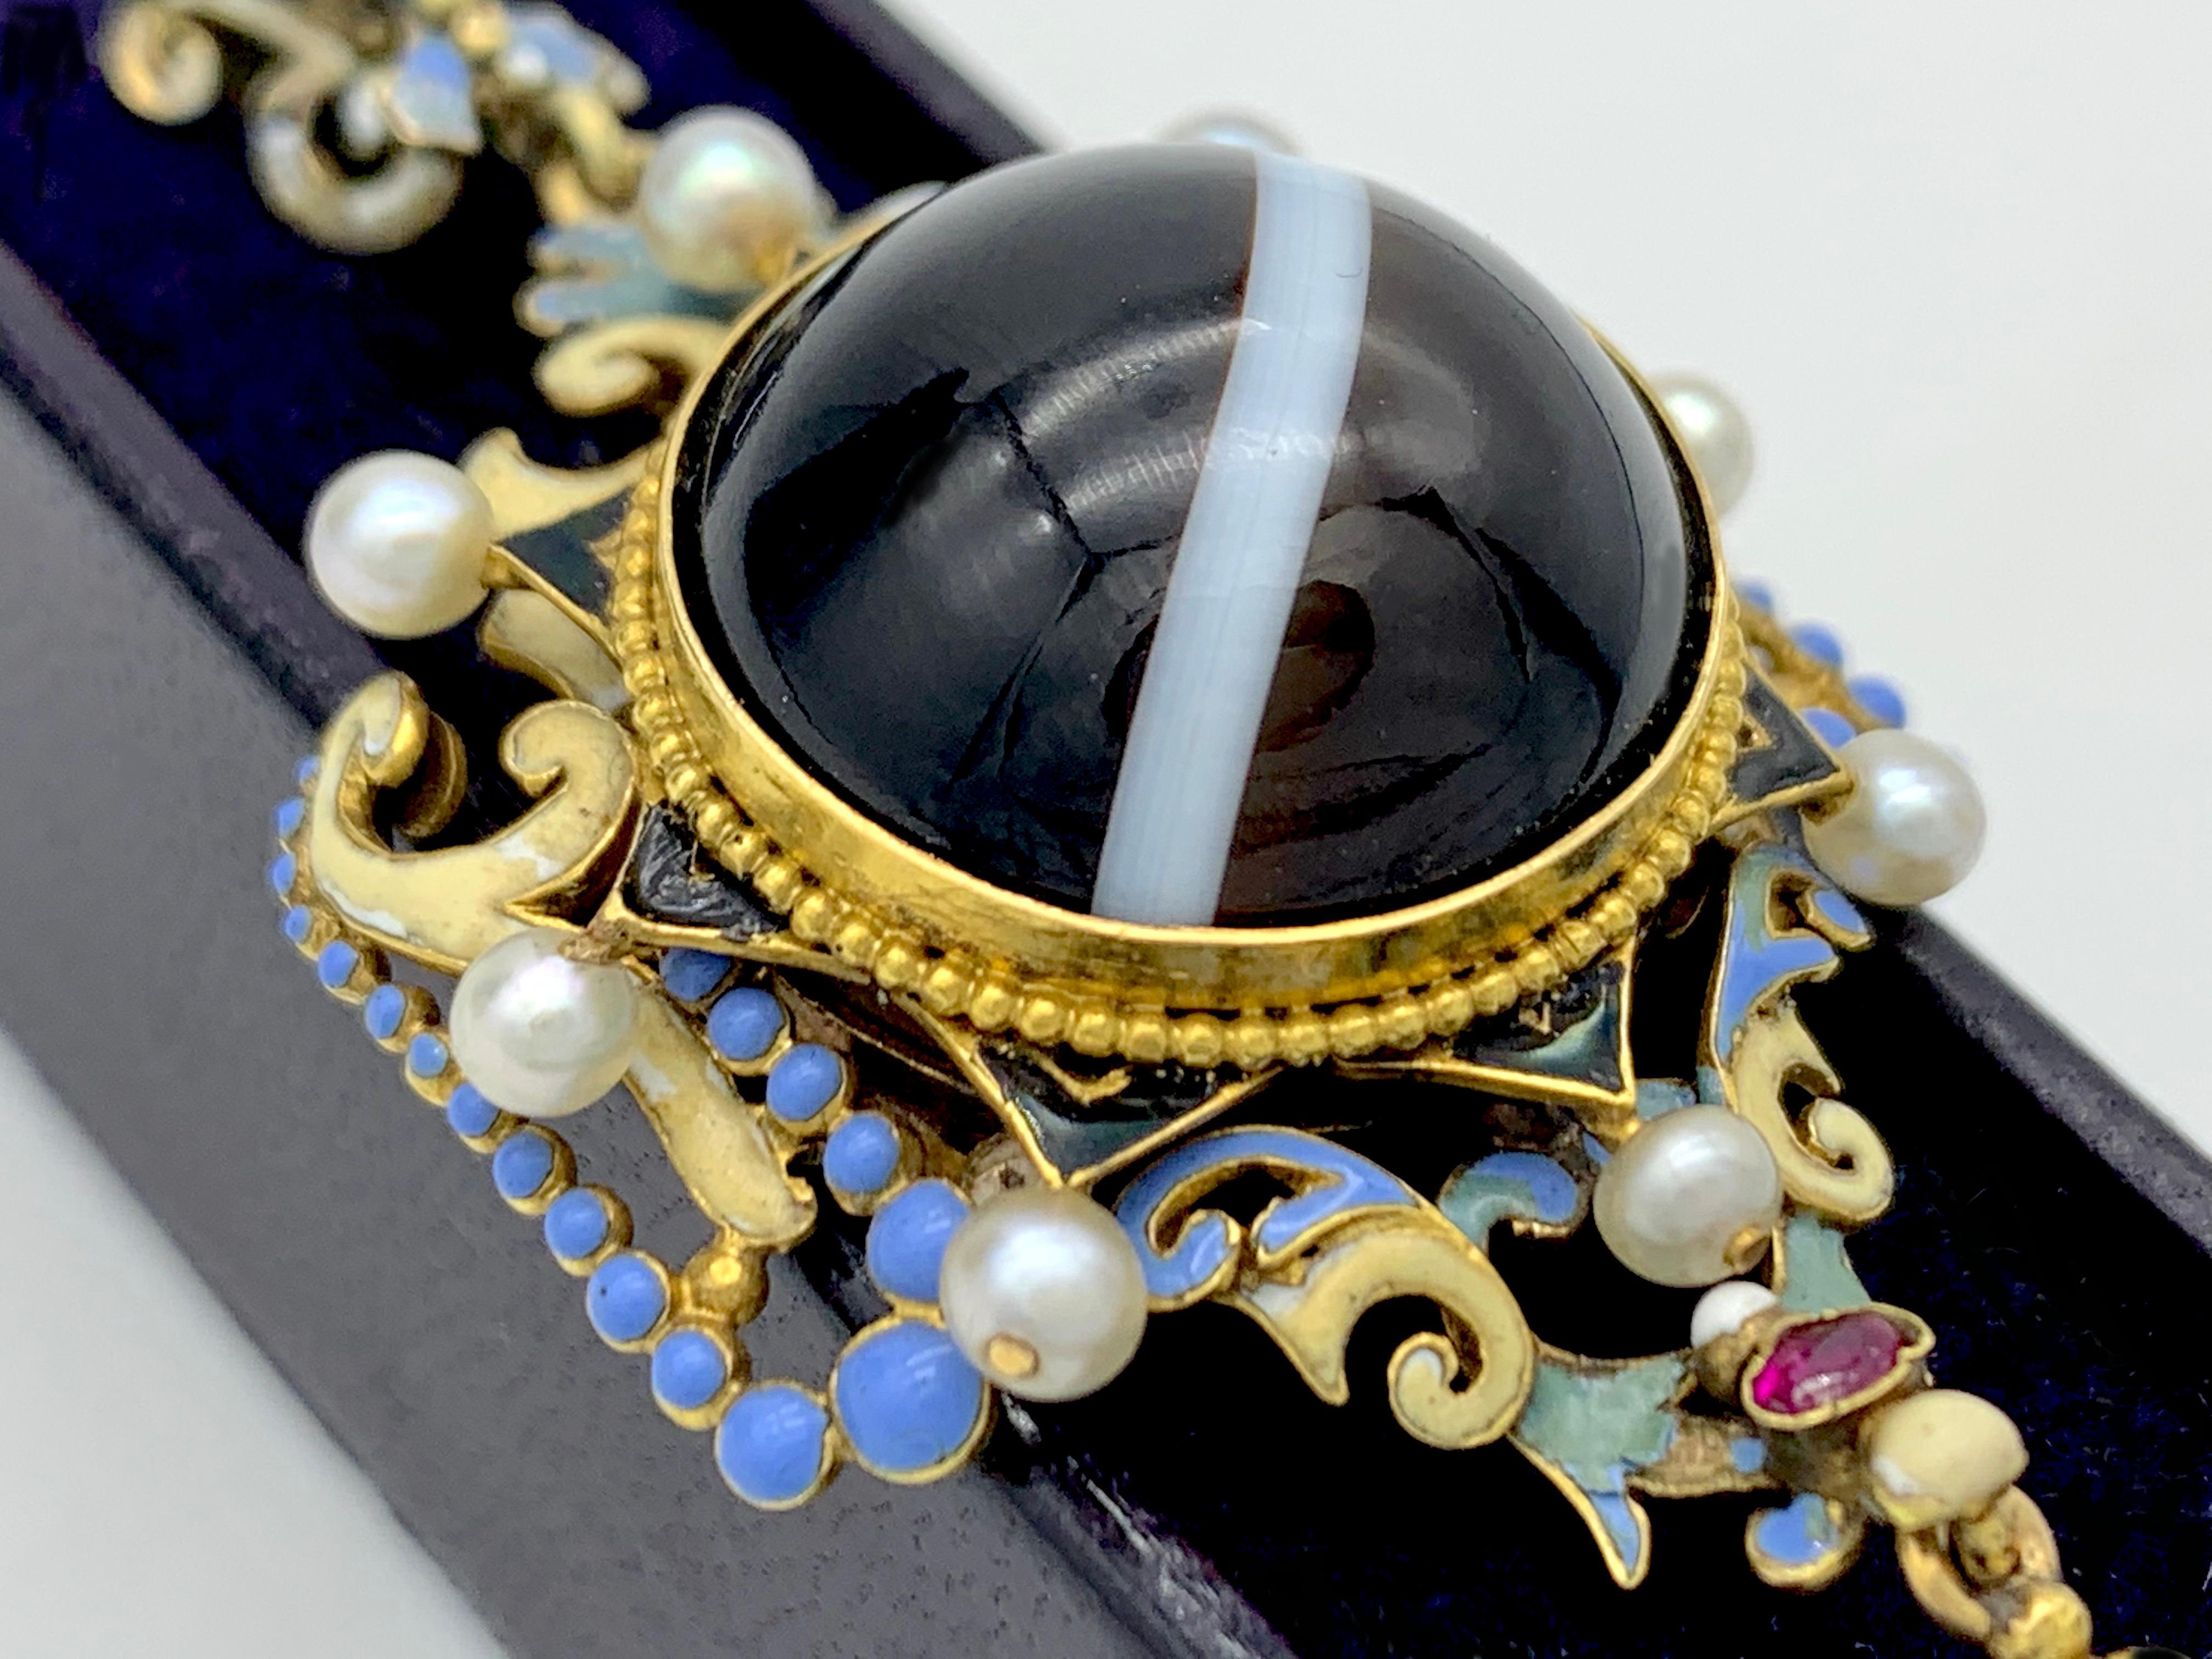 This wonderful holbeinesque renaissance revival pendant is set with a lovely sardonyx cabochon and richly decorated with polychrome enamel, rubies and fine natural pearls. There ia locket on the reverse.
This bright and lively jewel has been,